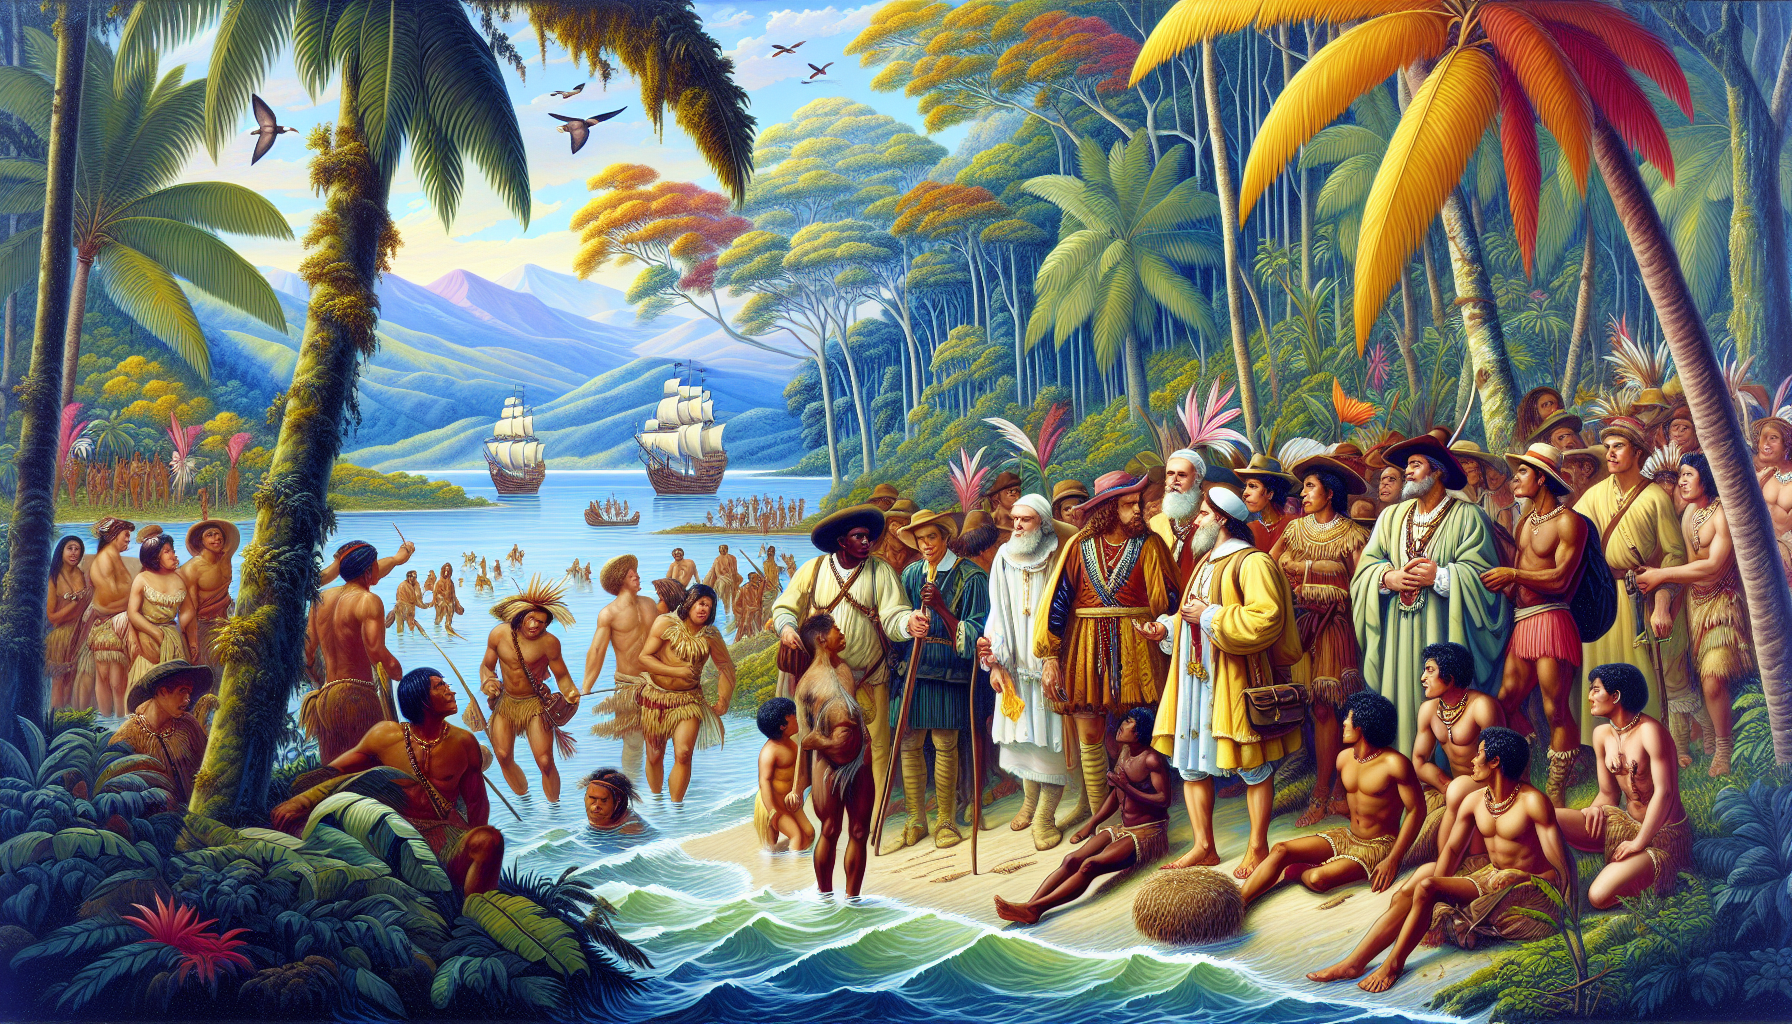 Painting of early Christian missionaries arriving on the shores of Costa Rica, interacting with indigenous people under tropical trees, with a background of dense rainforest and distant mountains, in